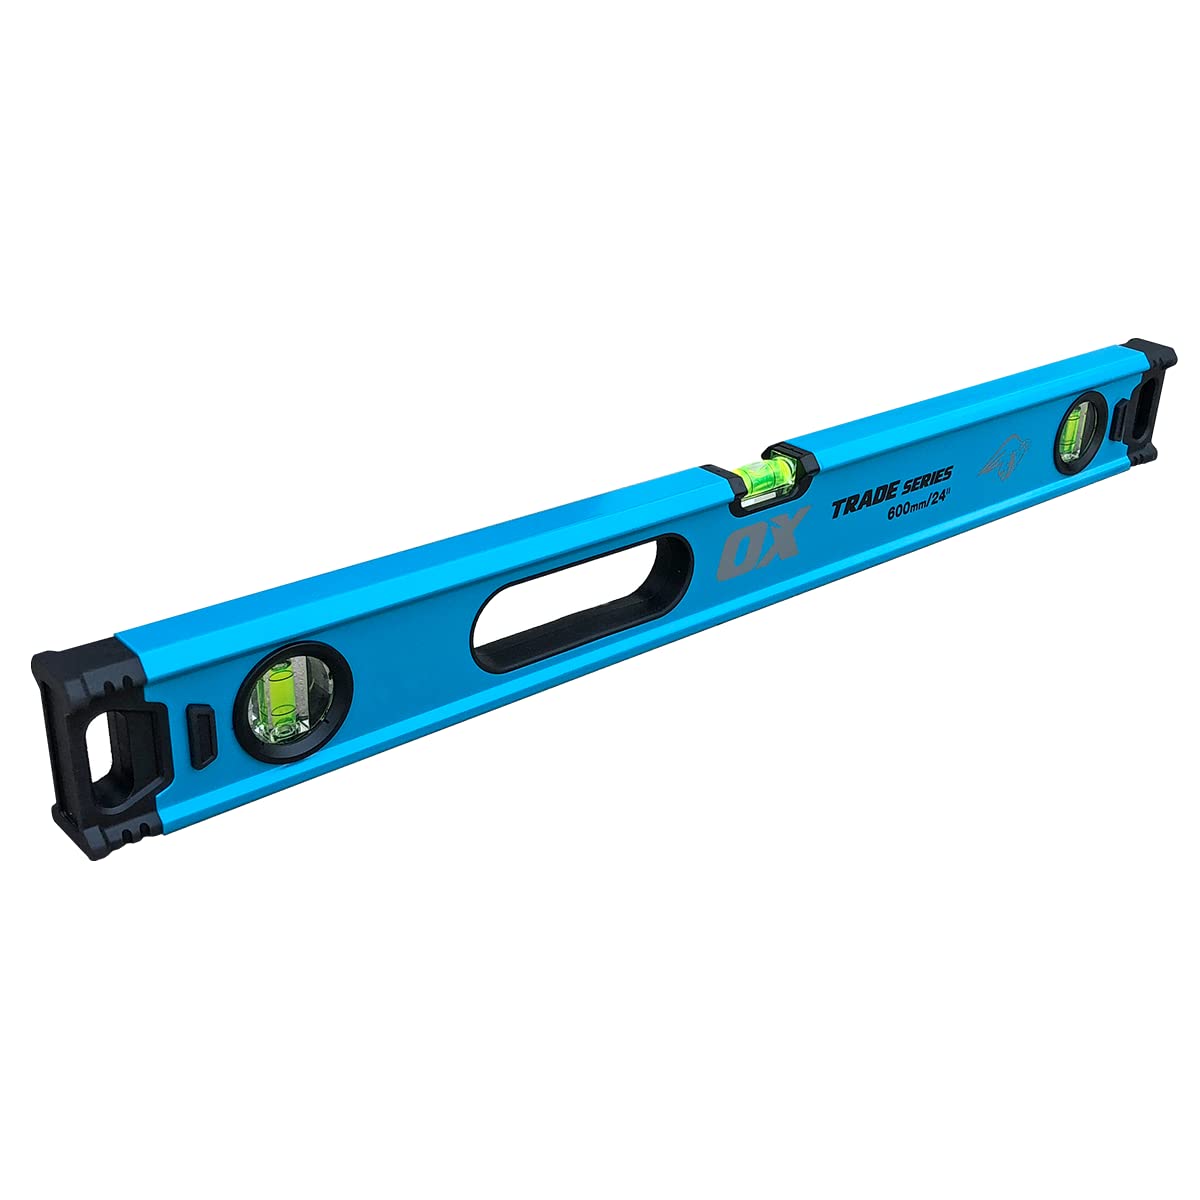 OX Tools Box Beam Level Non Magnetic 48 Inch Level, Aluminum Construction, Shock Absorbing End Cap, Rubberized Soft Grip Thru Ha